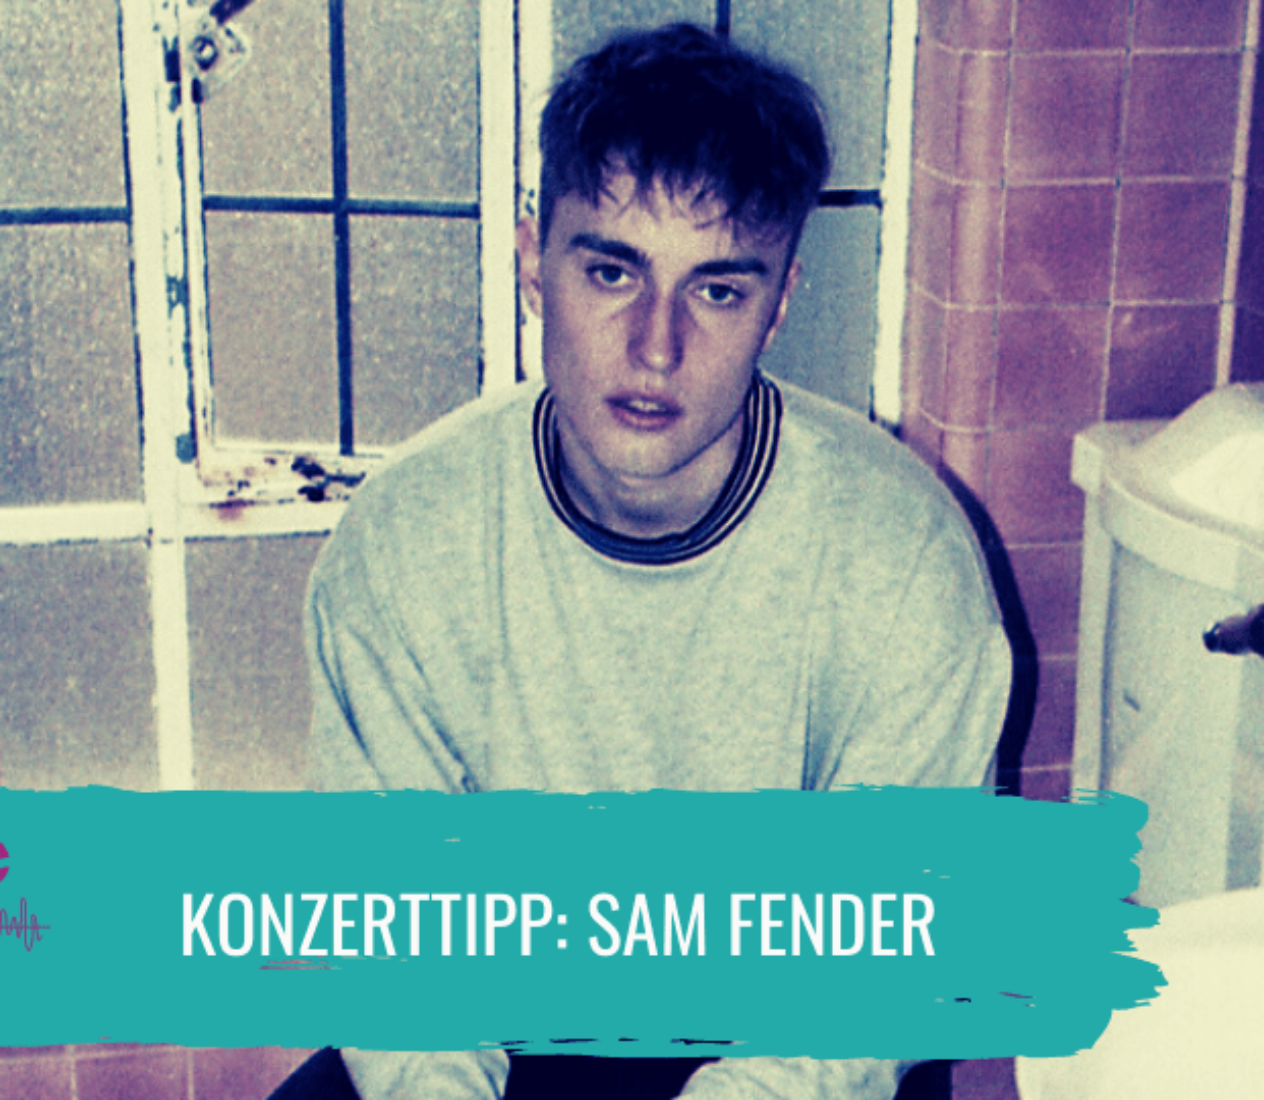 Sam Fender – Playing God with guitars